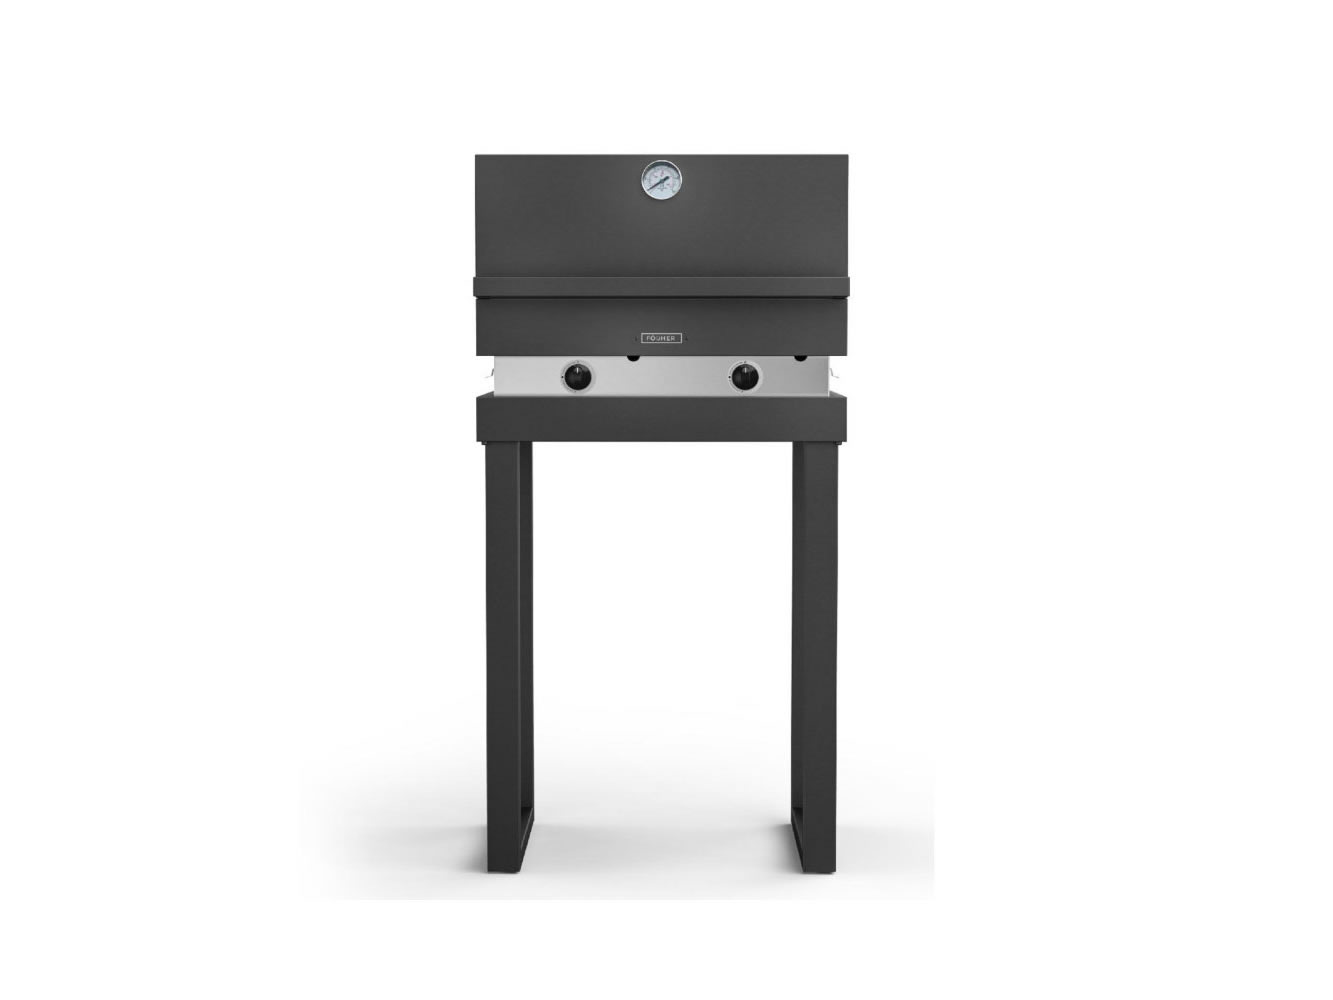 Fògher Gas Barbecue with Oven FGA 500 FO with Fixed Tubular Legs